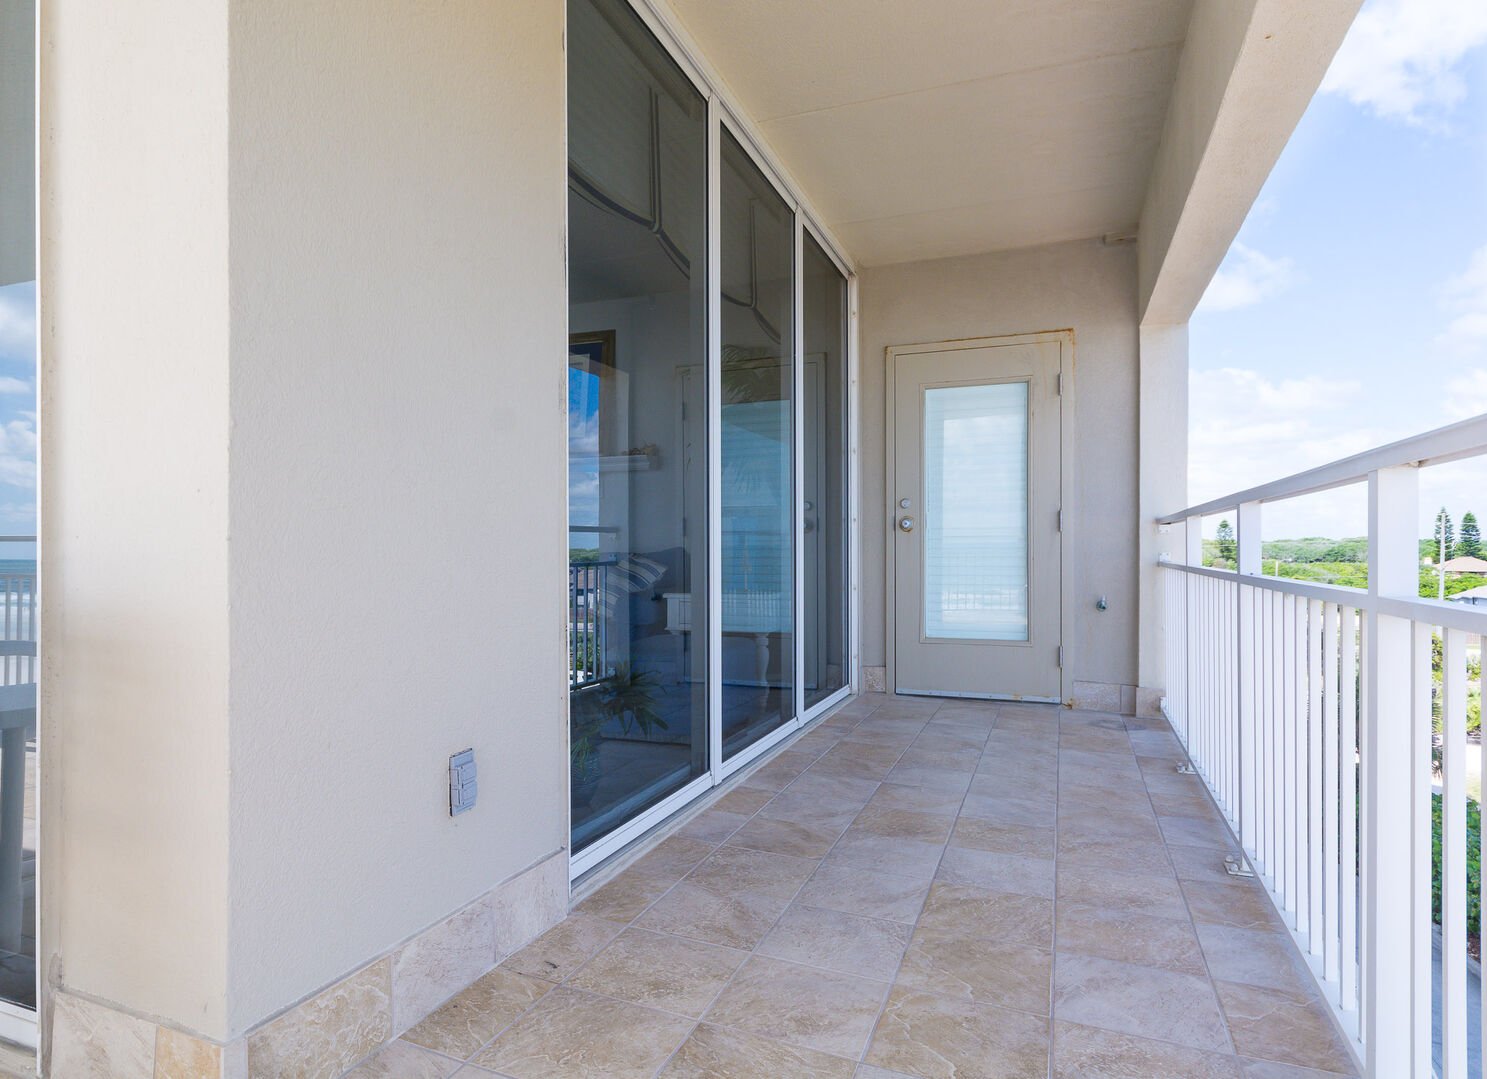 Wrap around porch at this Oceanfront condo in New Smyrna Beach FL.